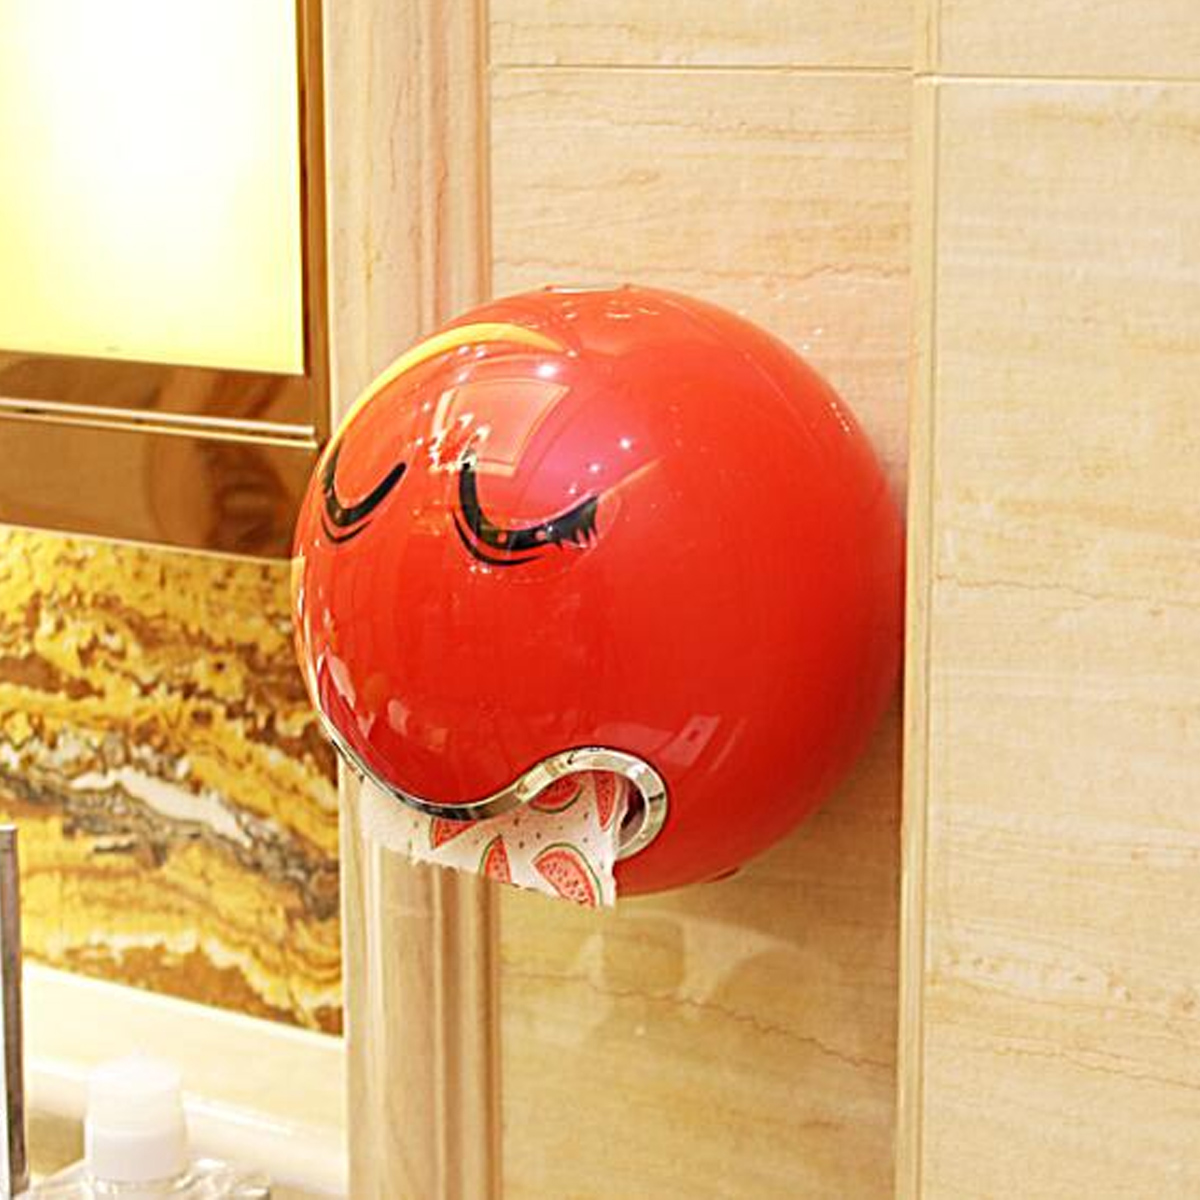 Bathroom-Ball-Shaped-Face-Wall-Mounted-Tissue-Holder-Toilet-Roll-Paper-Box-Paper-Shelf-Holder-1634911-8